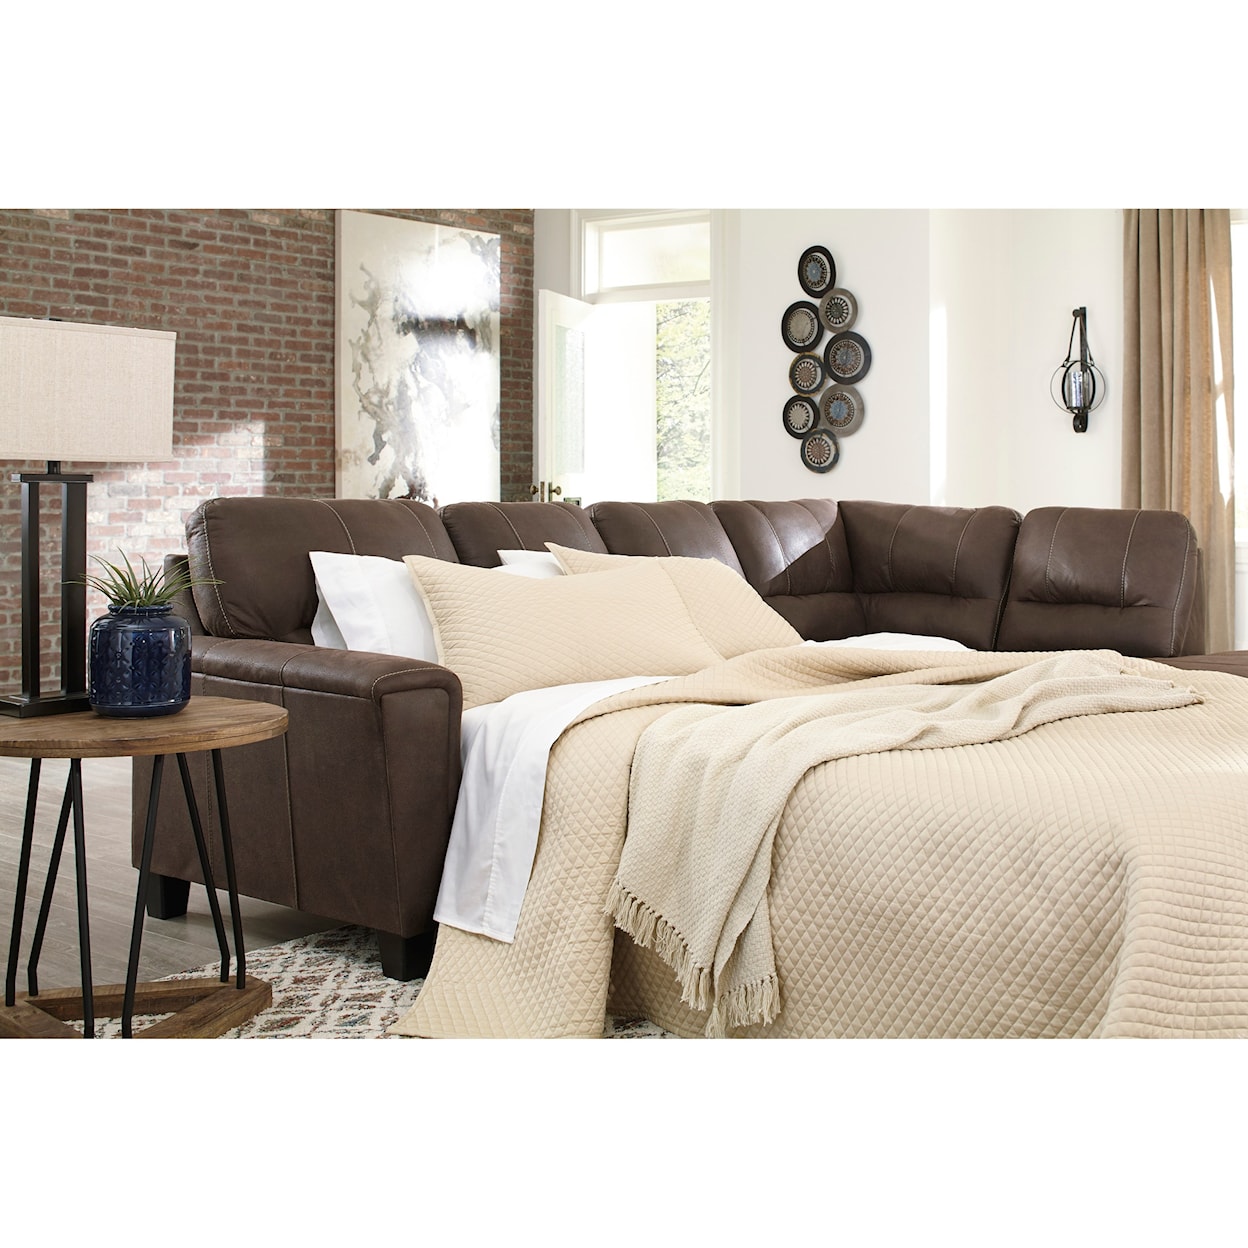 Signature Design by Ashley Navi 2-Piece Sectional w/ Right Chaise & Sleeper